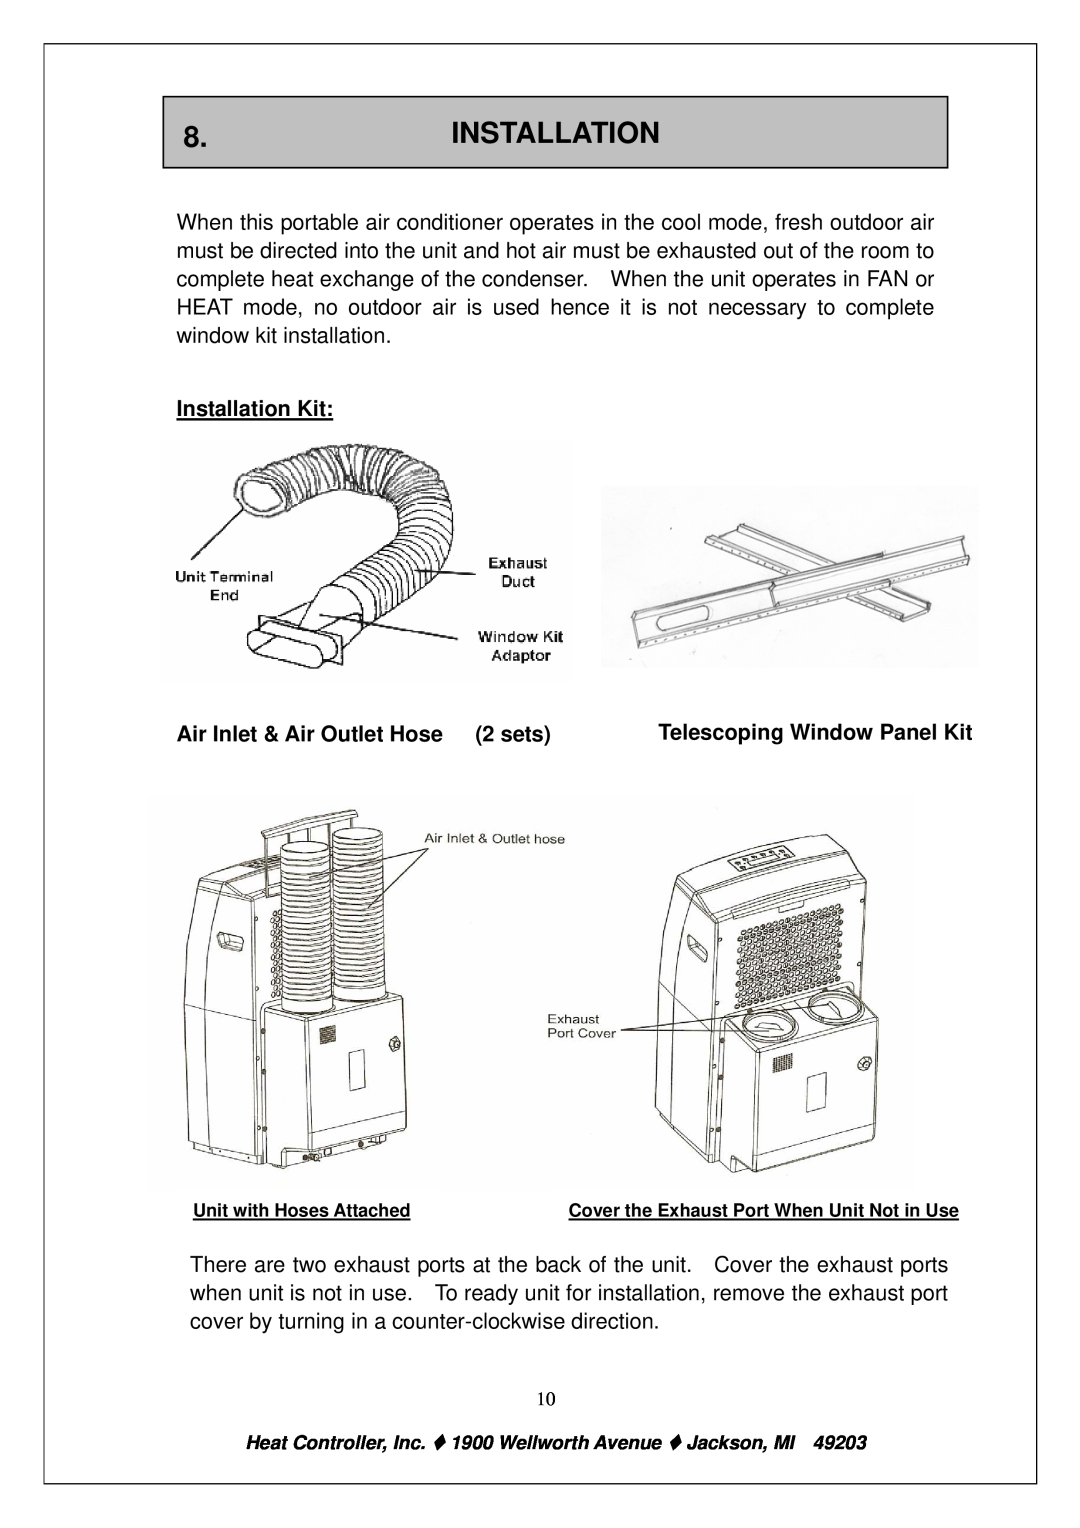 Heat Controller PE-91A PE-121A owner manual Installation Kit, Air Inlet & Air Outlet Hose 2 sets 